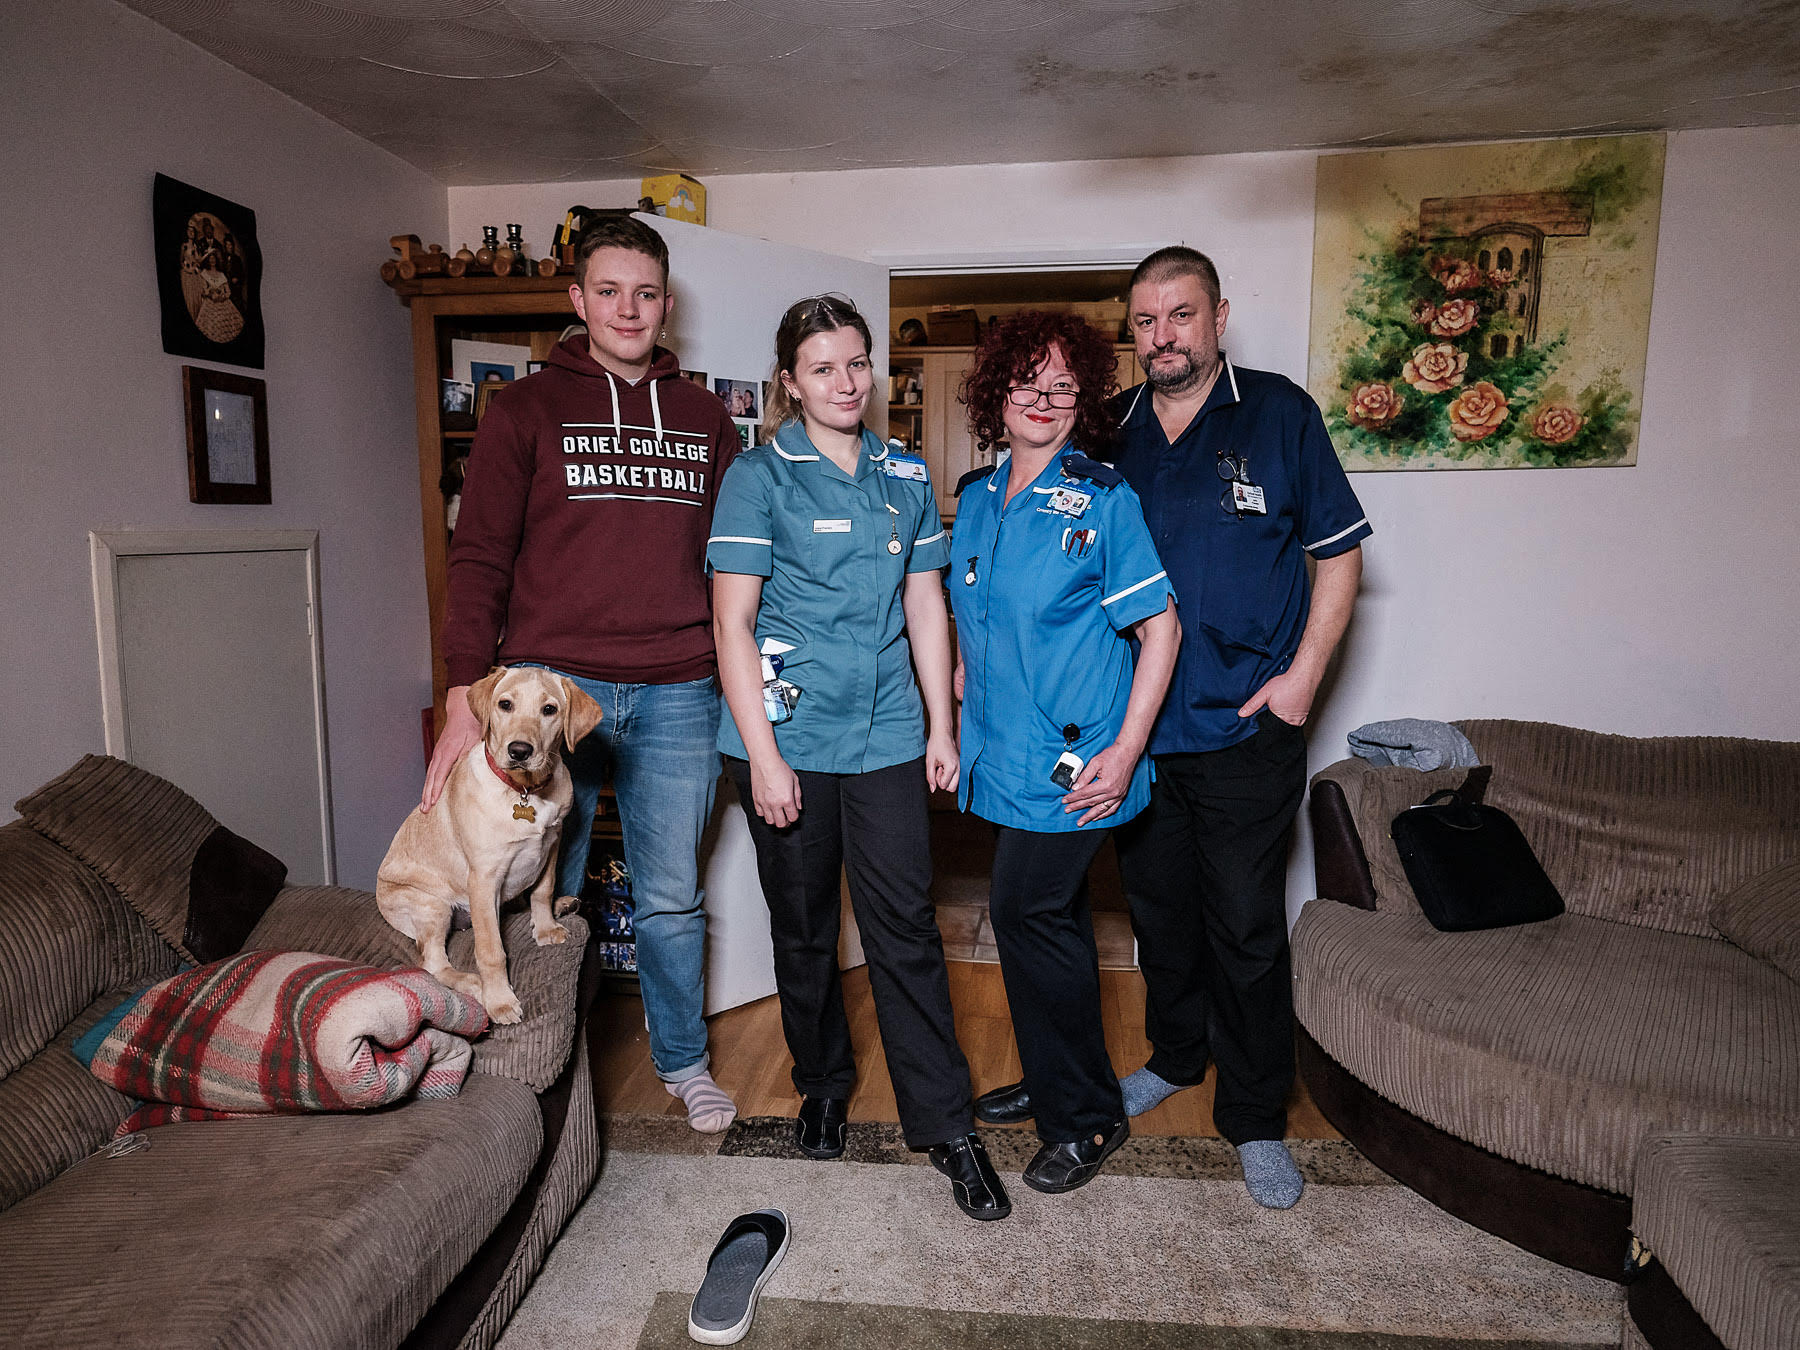 The nurses Camelia and Cătălin Frandeș, and their children, Andrei, a medicine student, and Ioana, a midwife trainee, in their family home inRugby, UK.